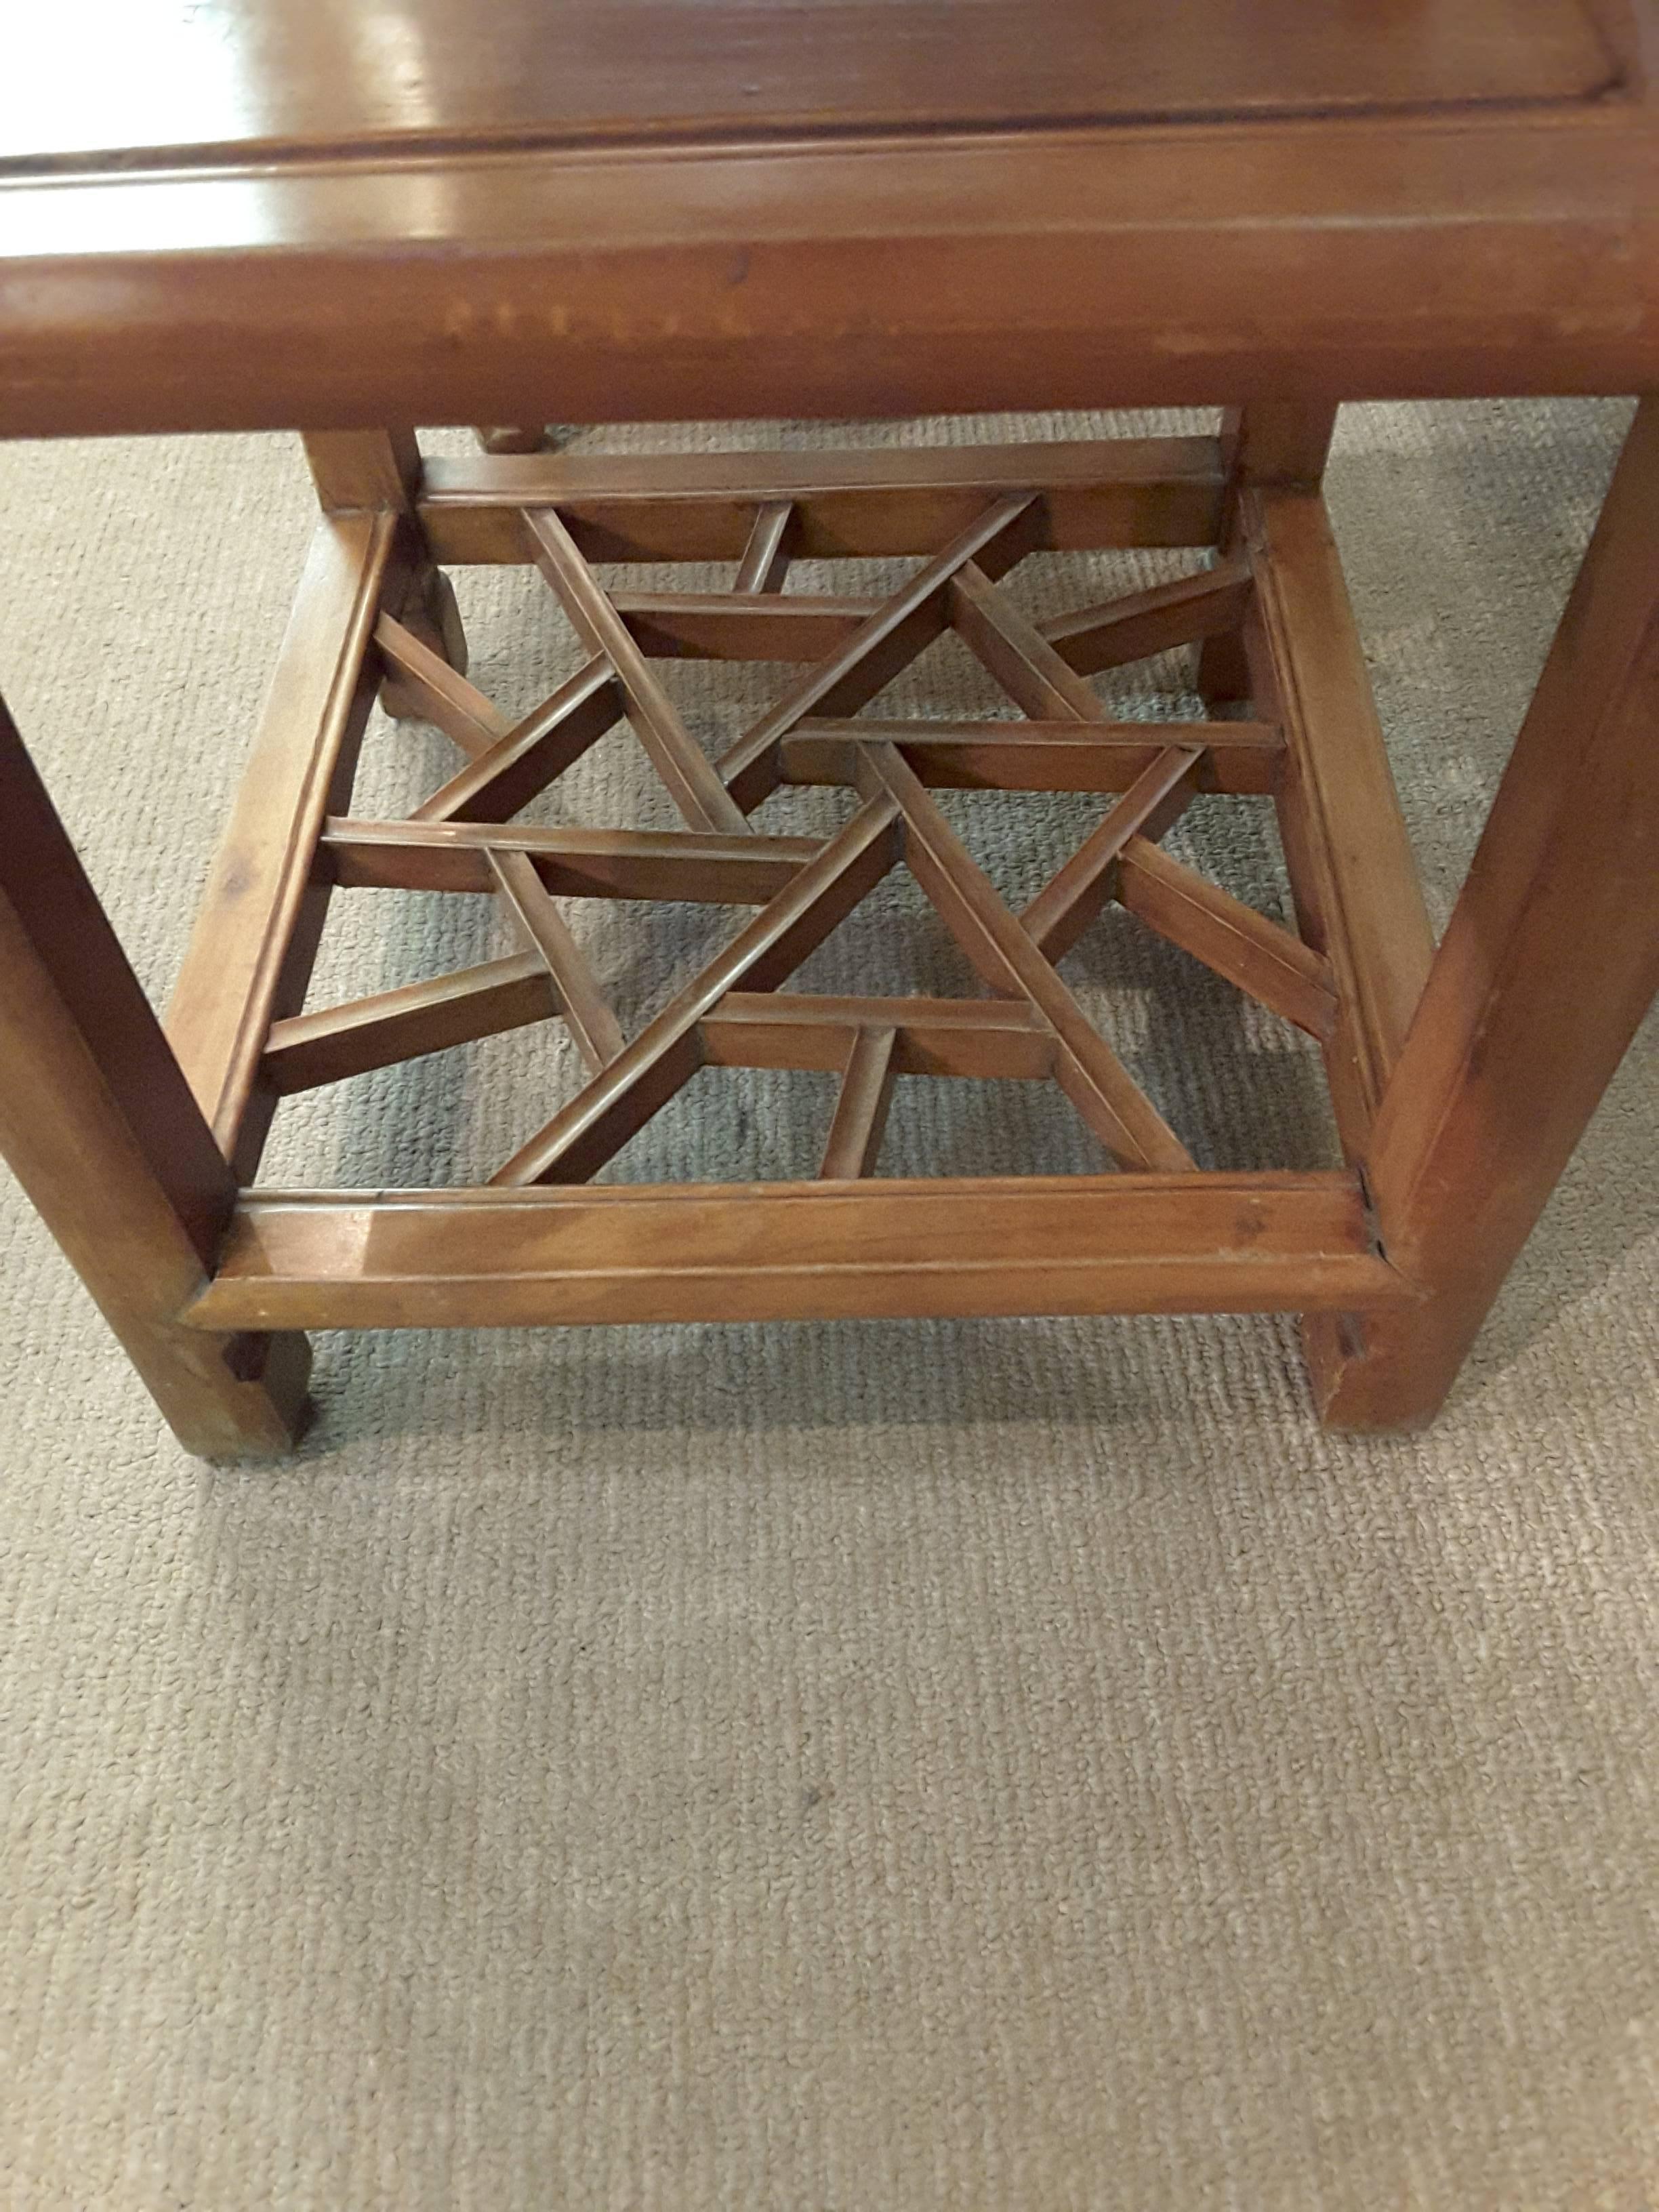 Wood Late Qing Dynasty Carved Hardwood Side Tables or Stands Southern Chinese For Sale